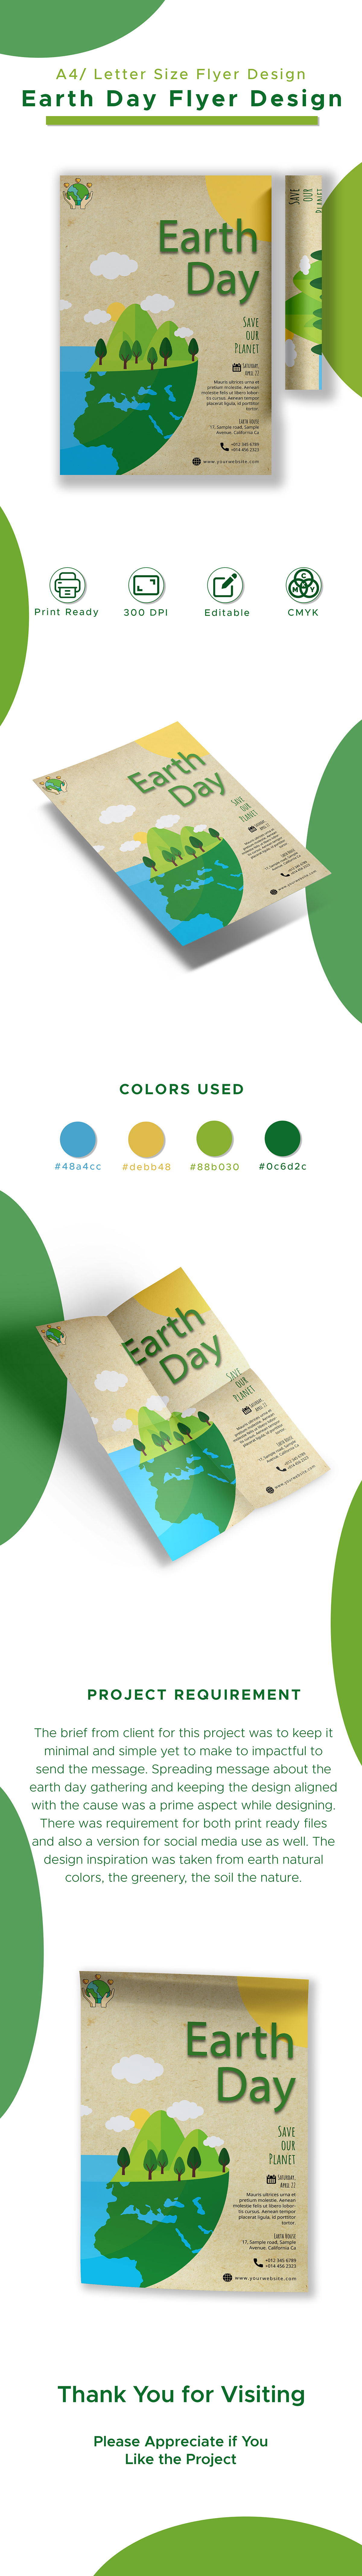 Earth Day Flyer Design